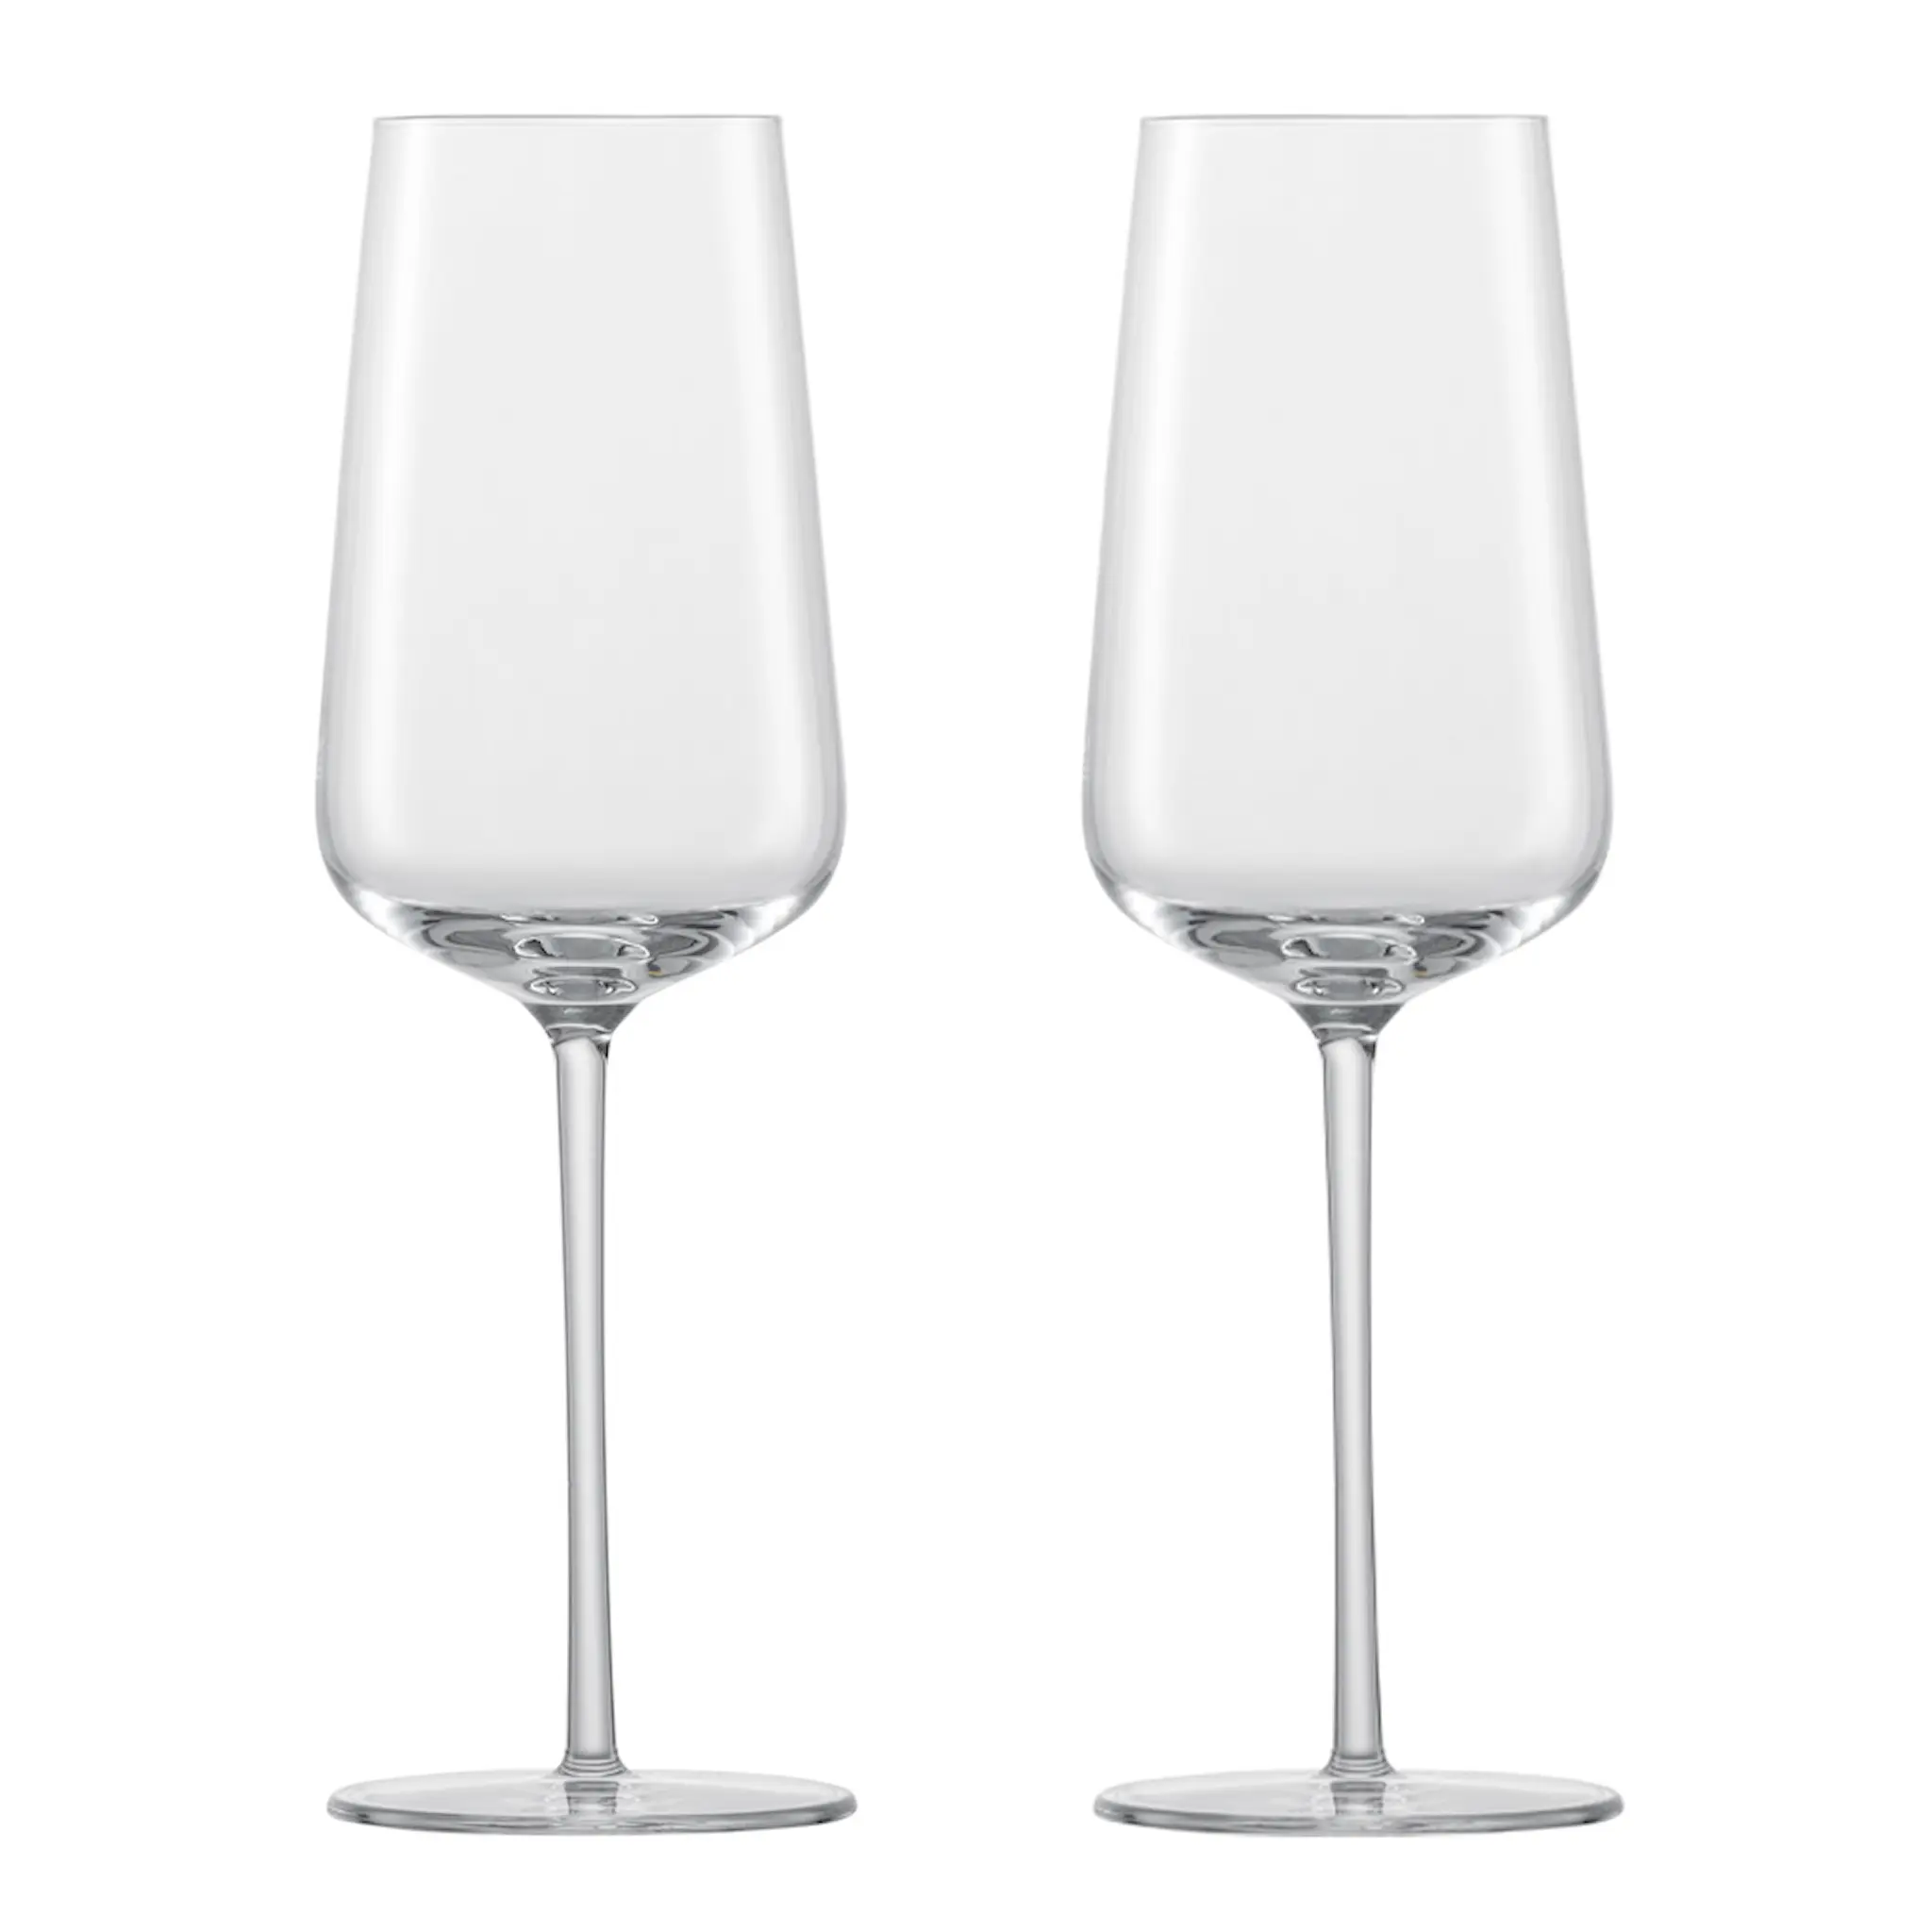 Zwiesel Vervino Champagneglas 35 cl 2-pack